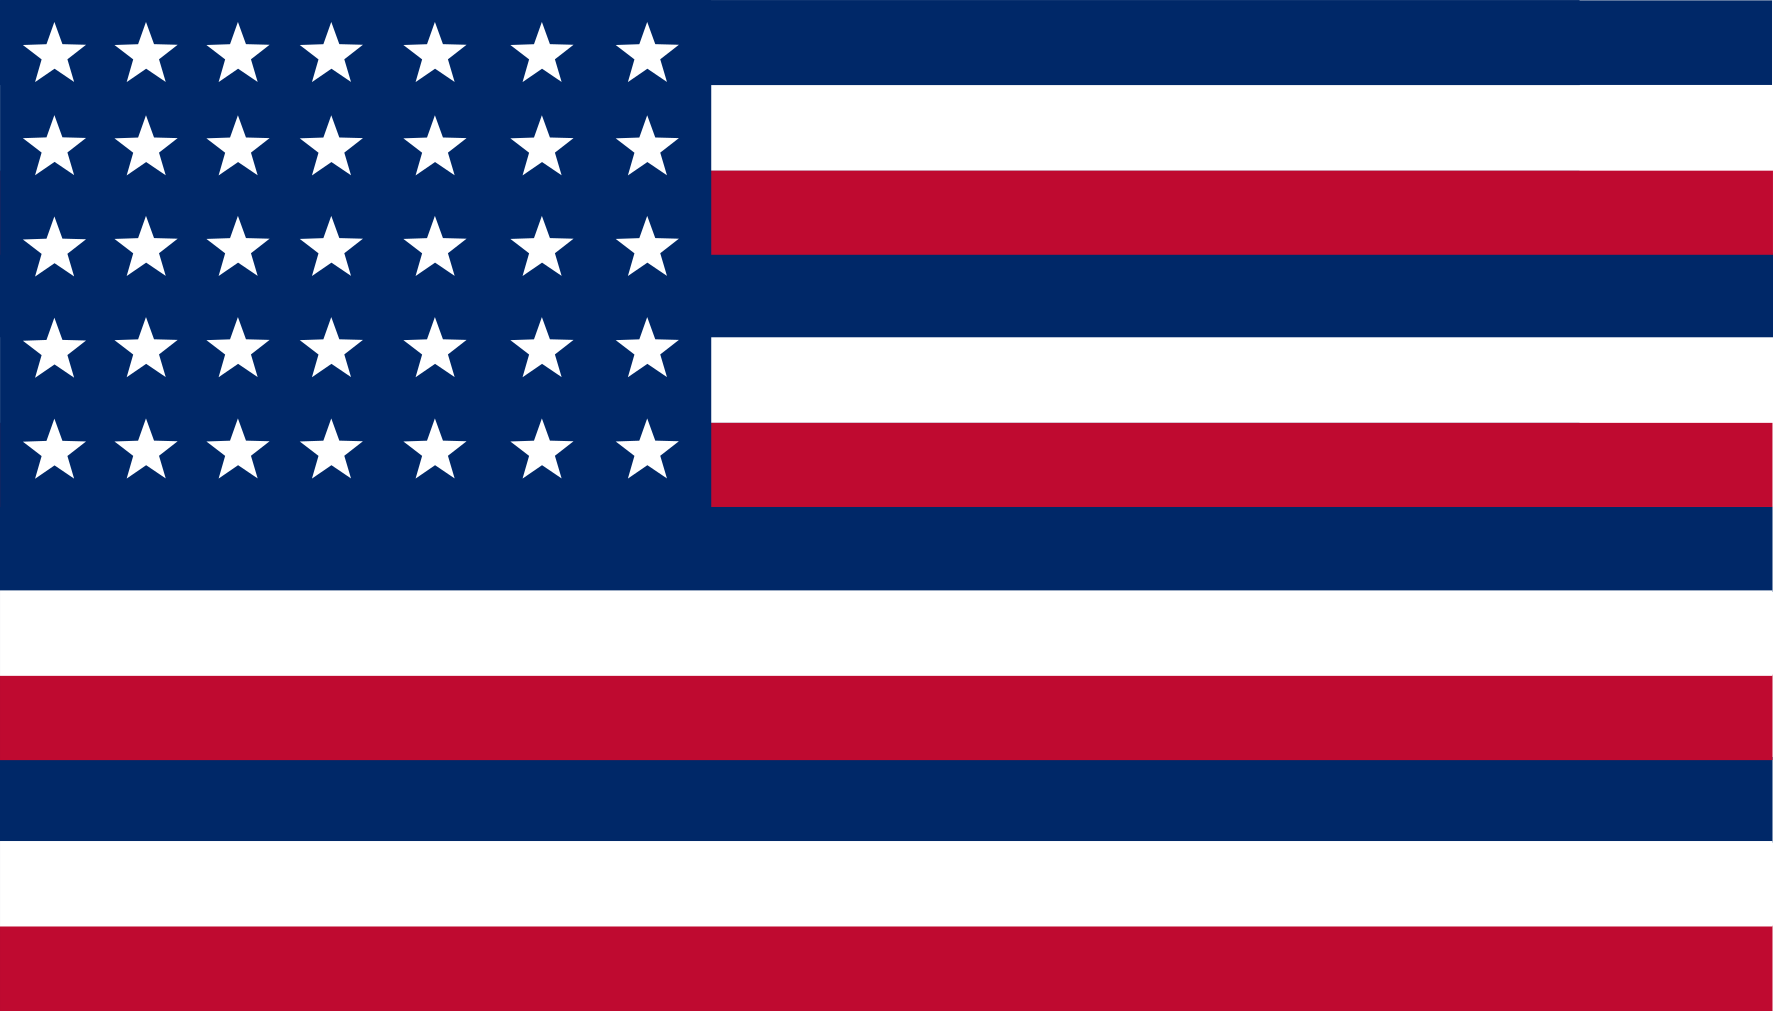 Revolutionary American flags images